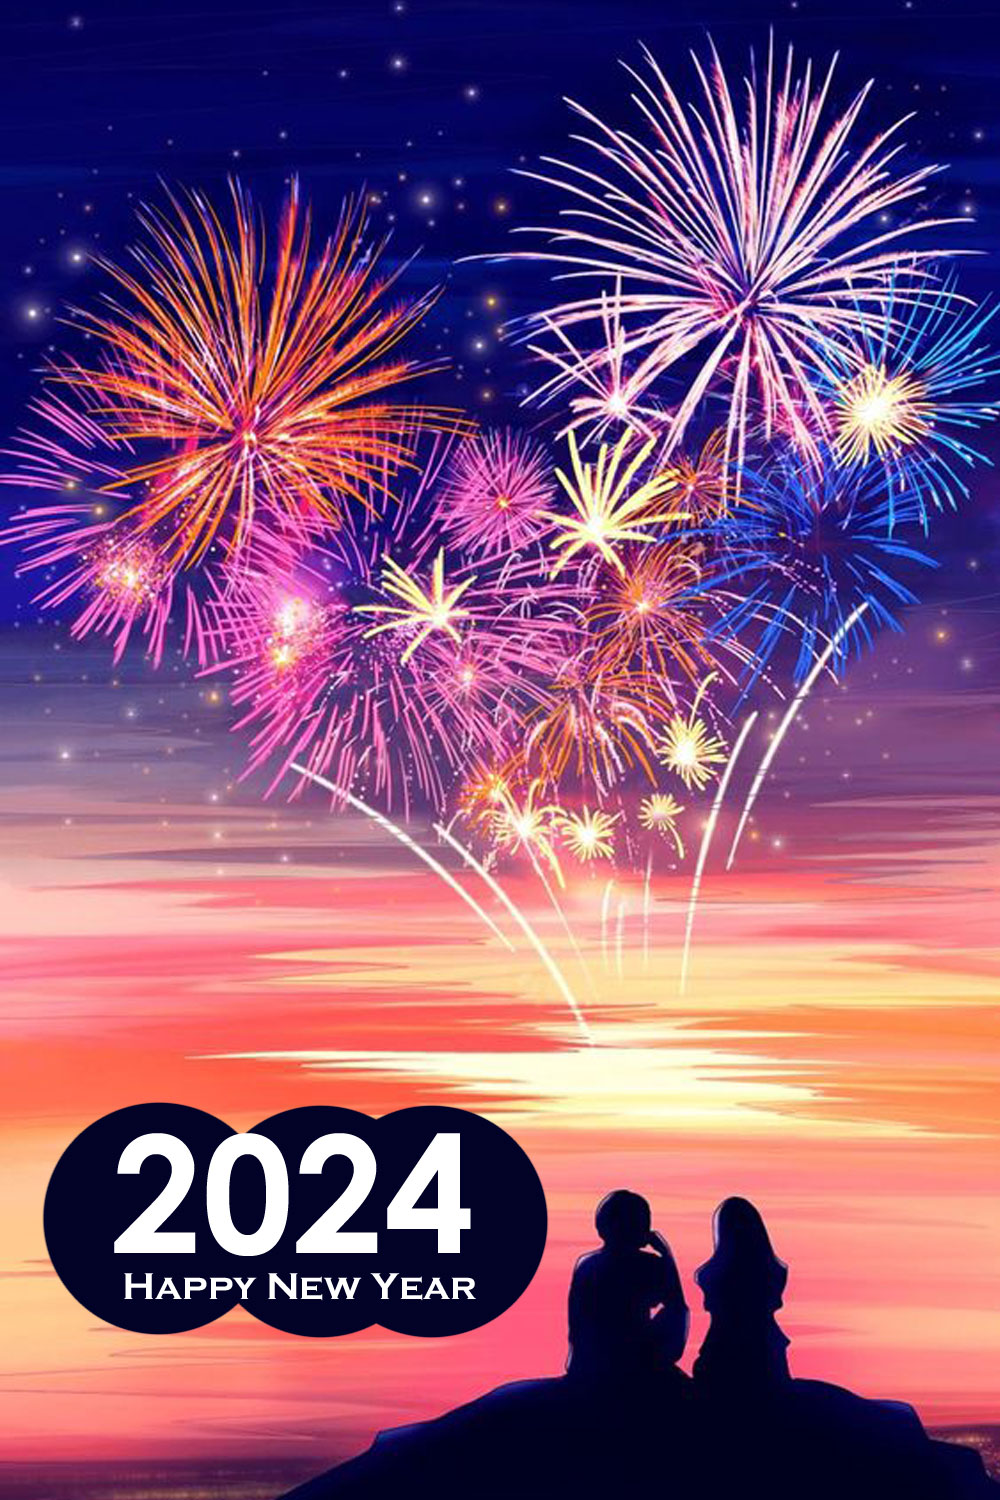 Happy New Year Love Image 2024 Birthday Wishes, Memes, SMS & Greeting eCard Image